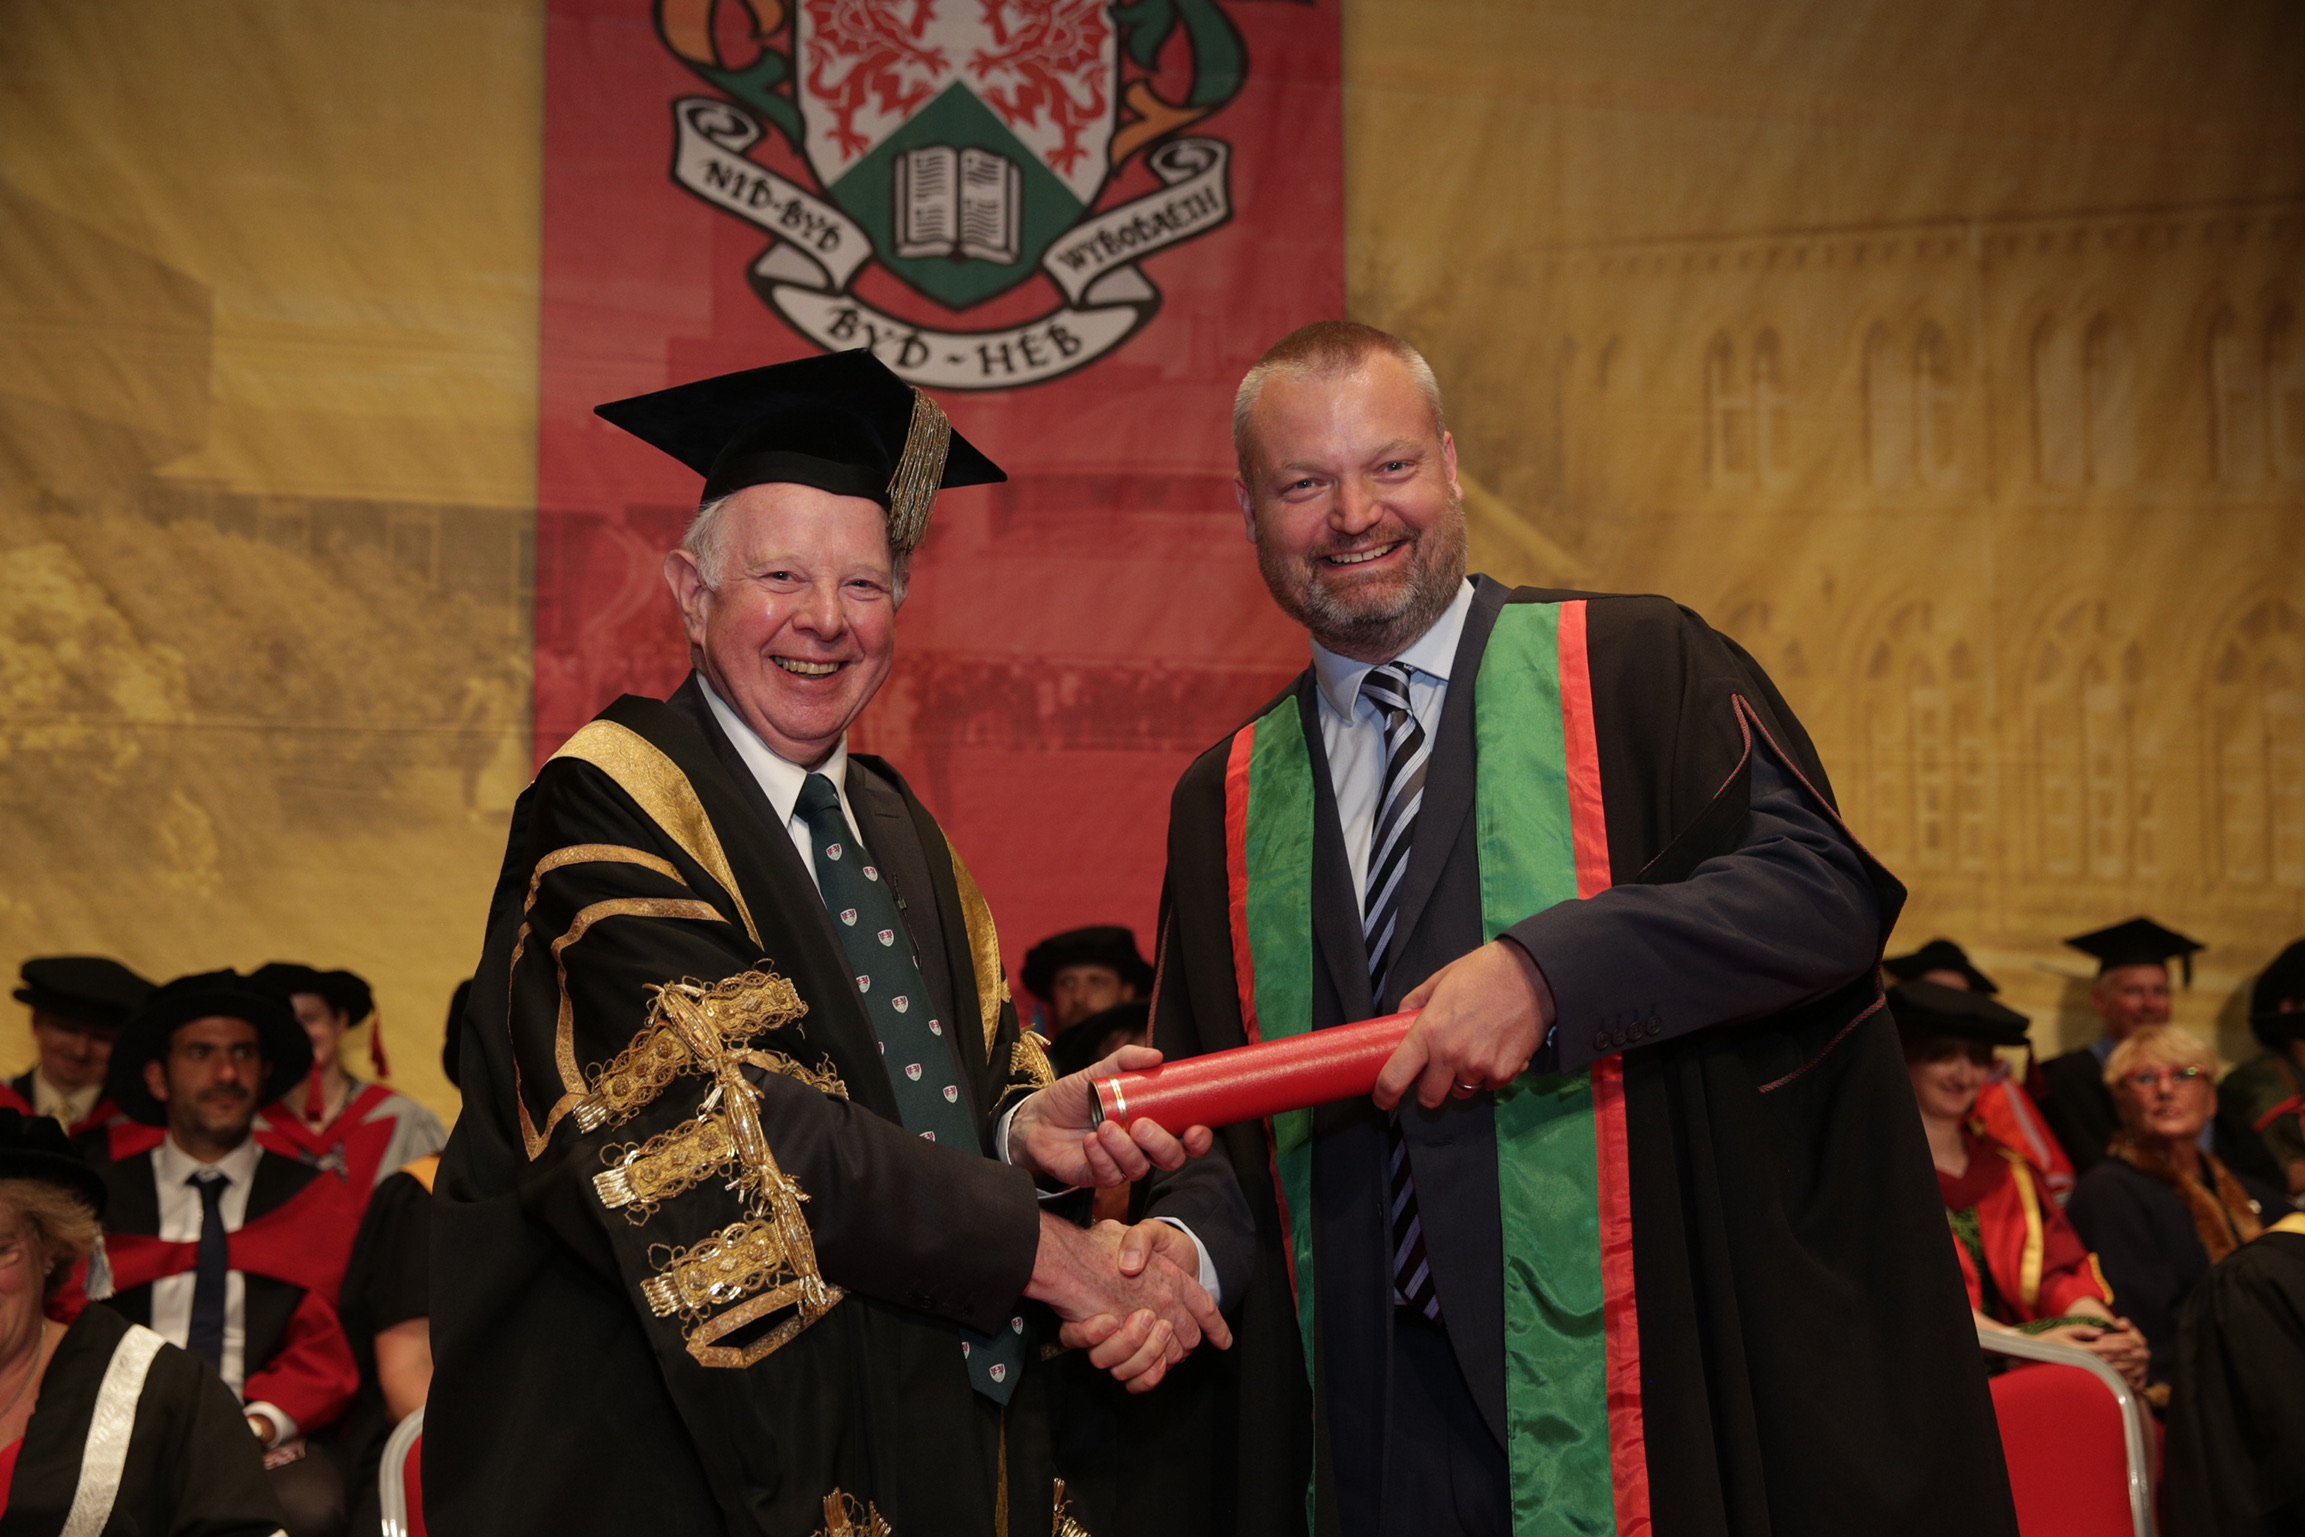 Aberystwyth University Chancellor, the Rt Hon. the Lord Thomas of Cwmgiedd with John Thompson, who received an Honorary Doctorate Degree